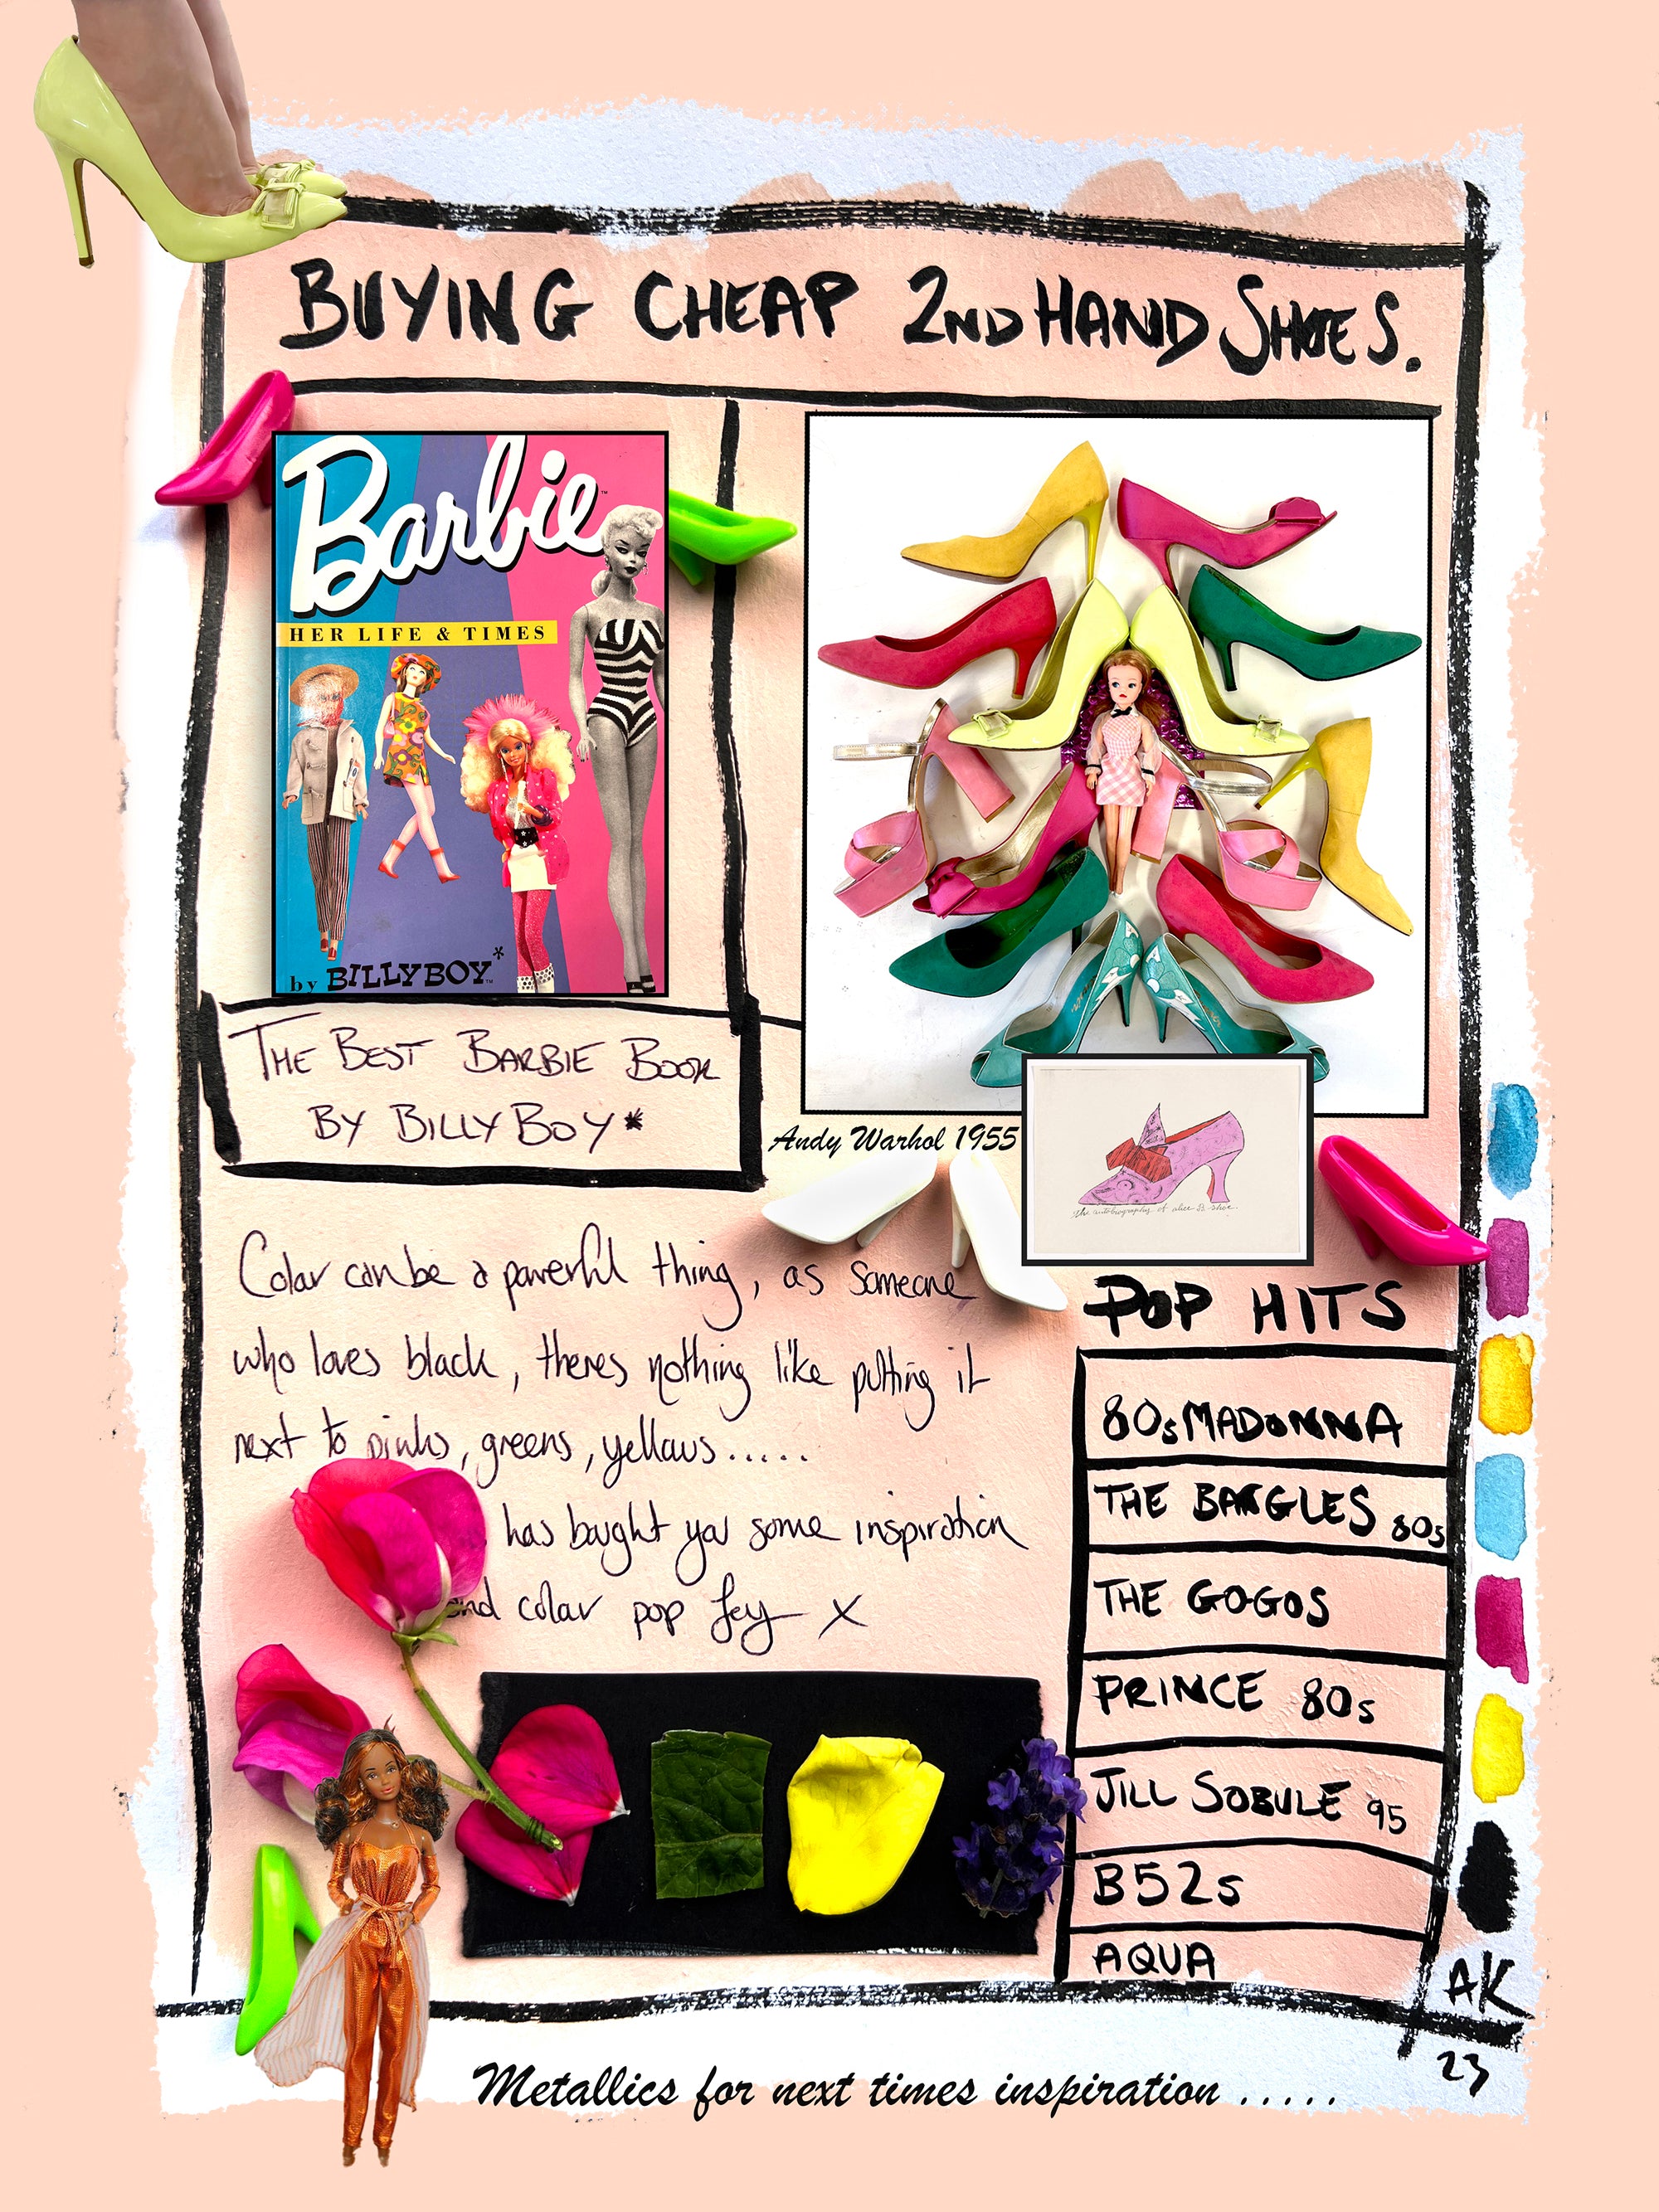 Alexandra King Dear Diary Newsletter Zine July 23 Page 6 shoes